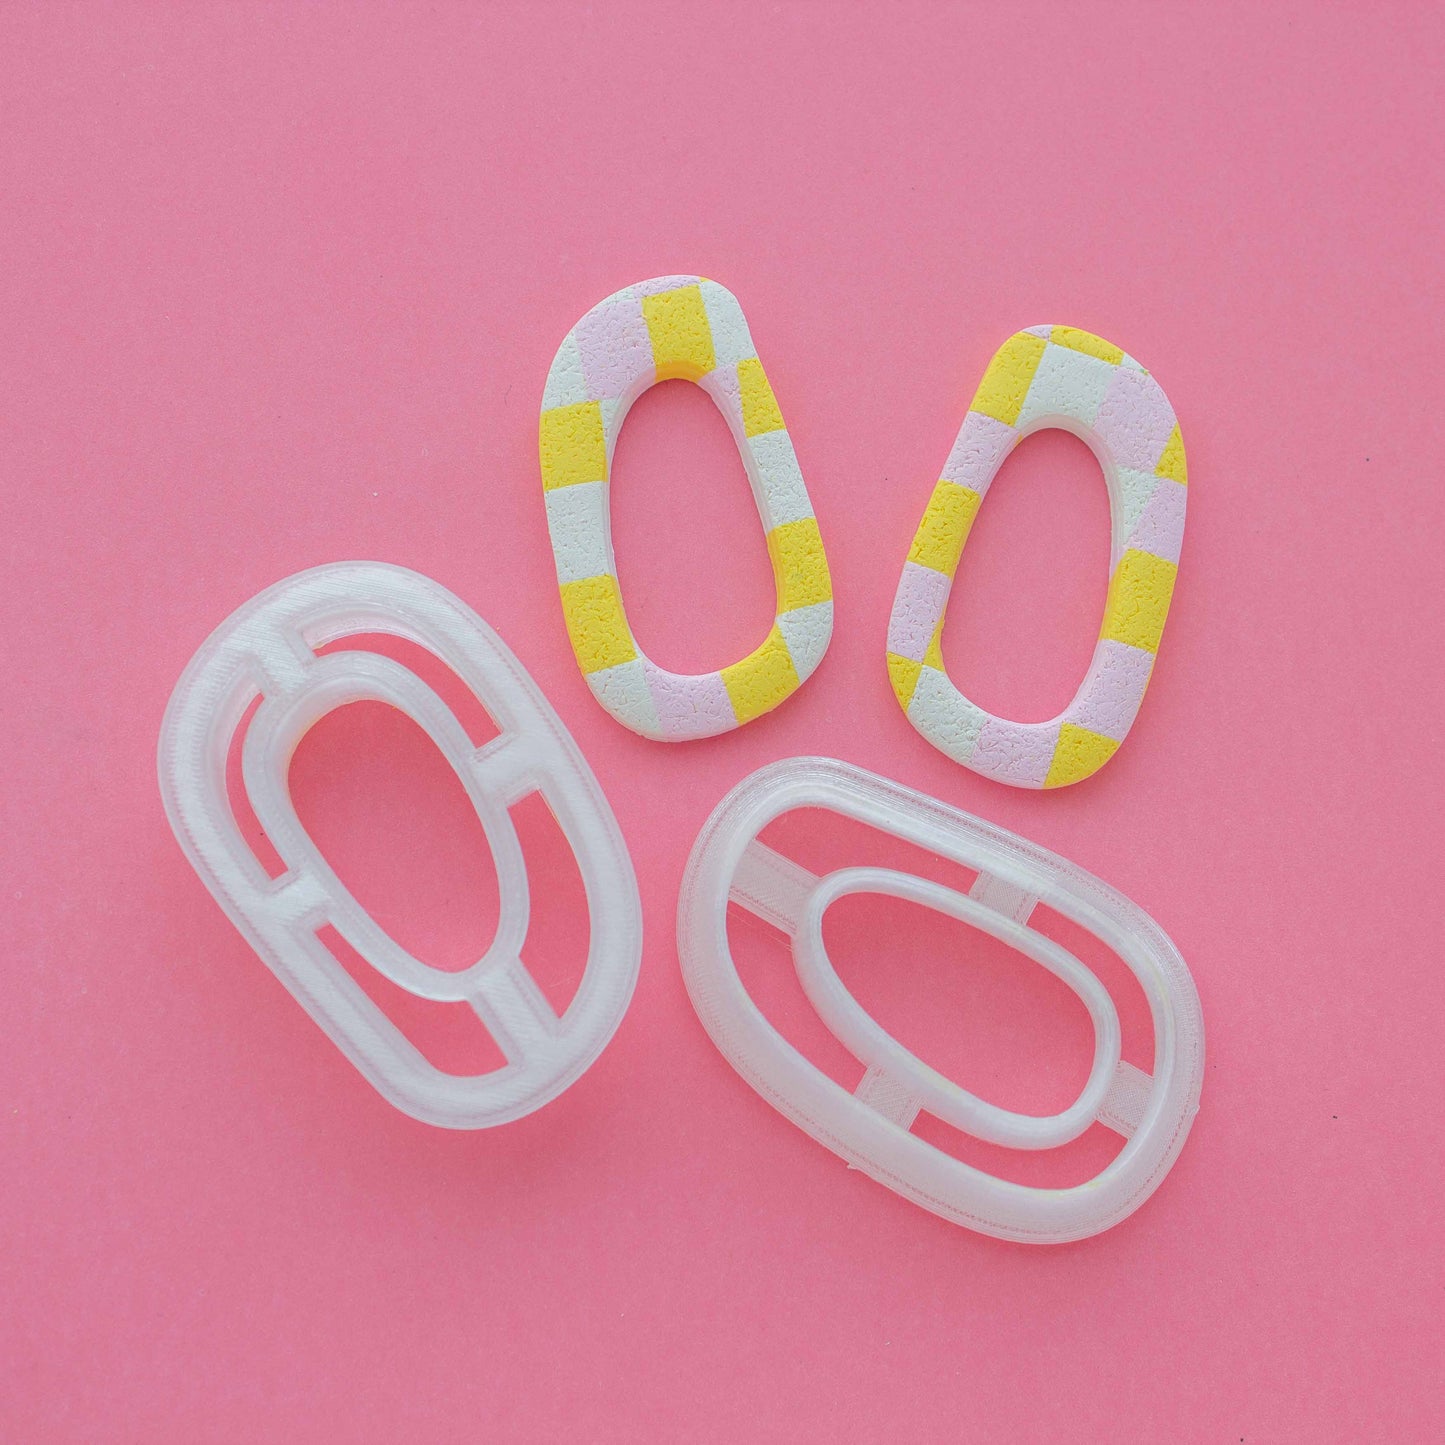 Two abstract hoop earrings and polymer clay cutters in a pink background